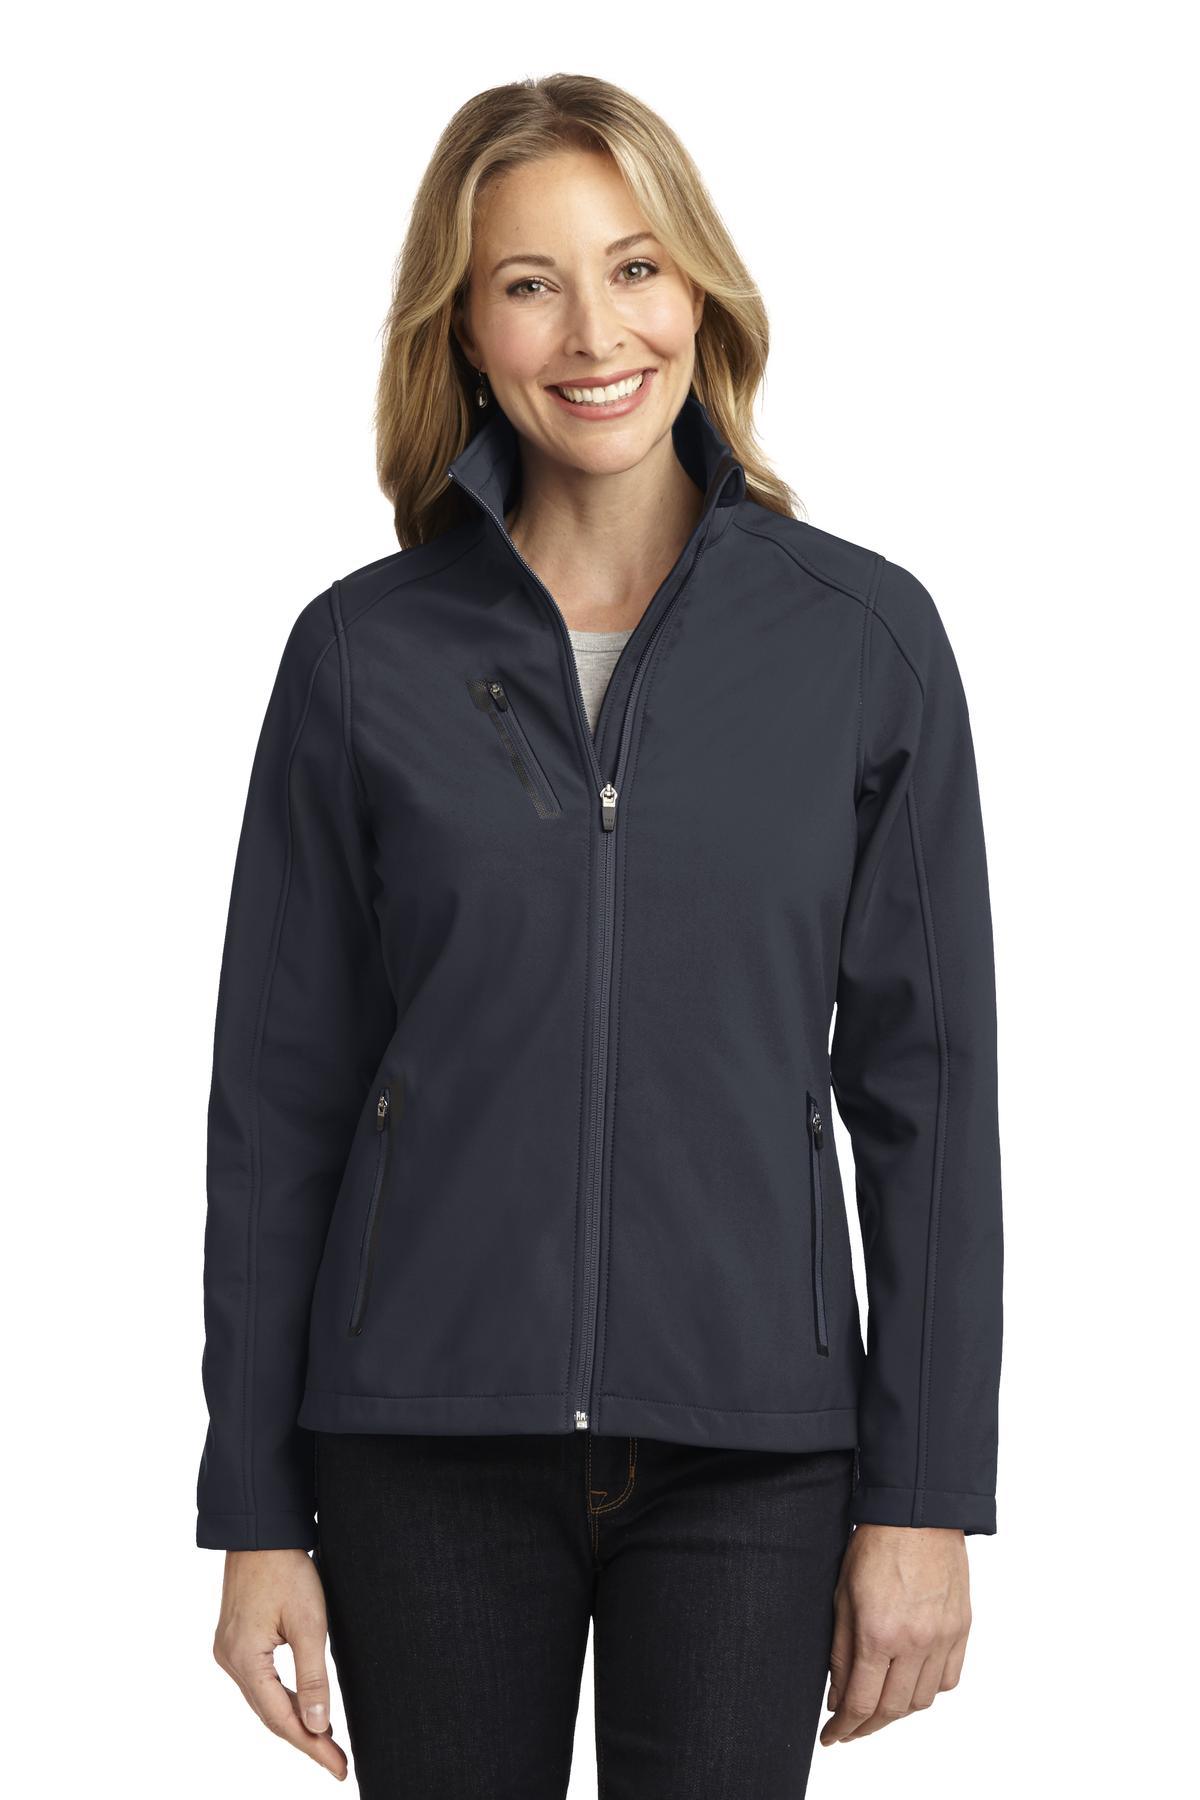 Port Authority Ladies Welded Soft Shell Jacket. L324 - Dresses Max